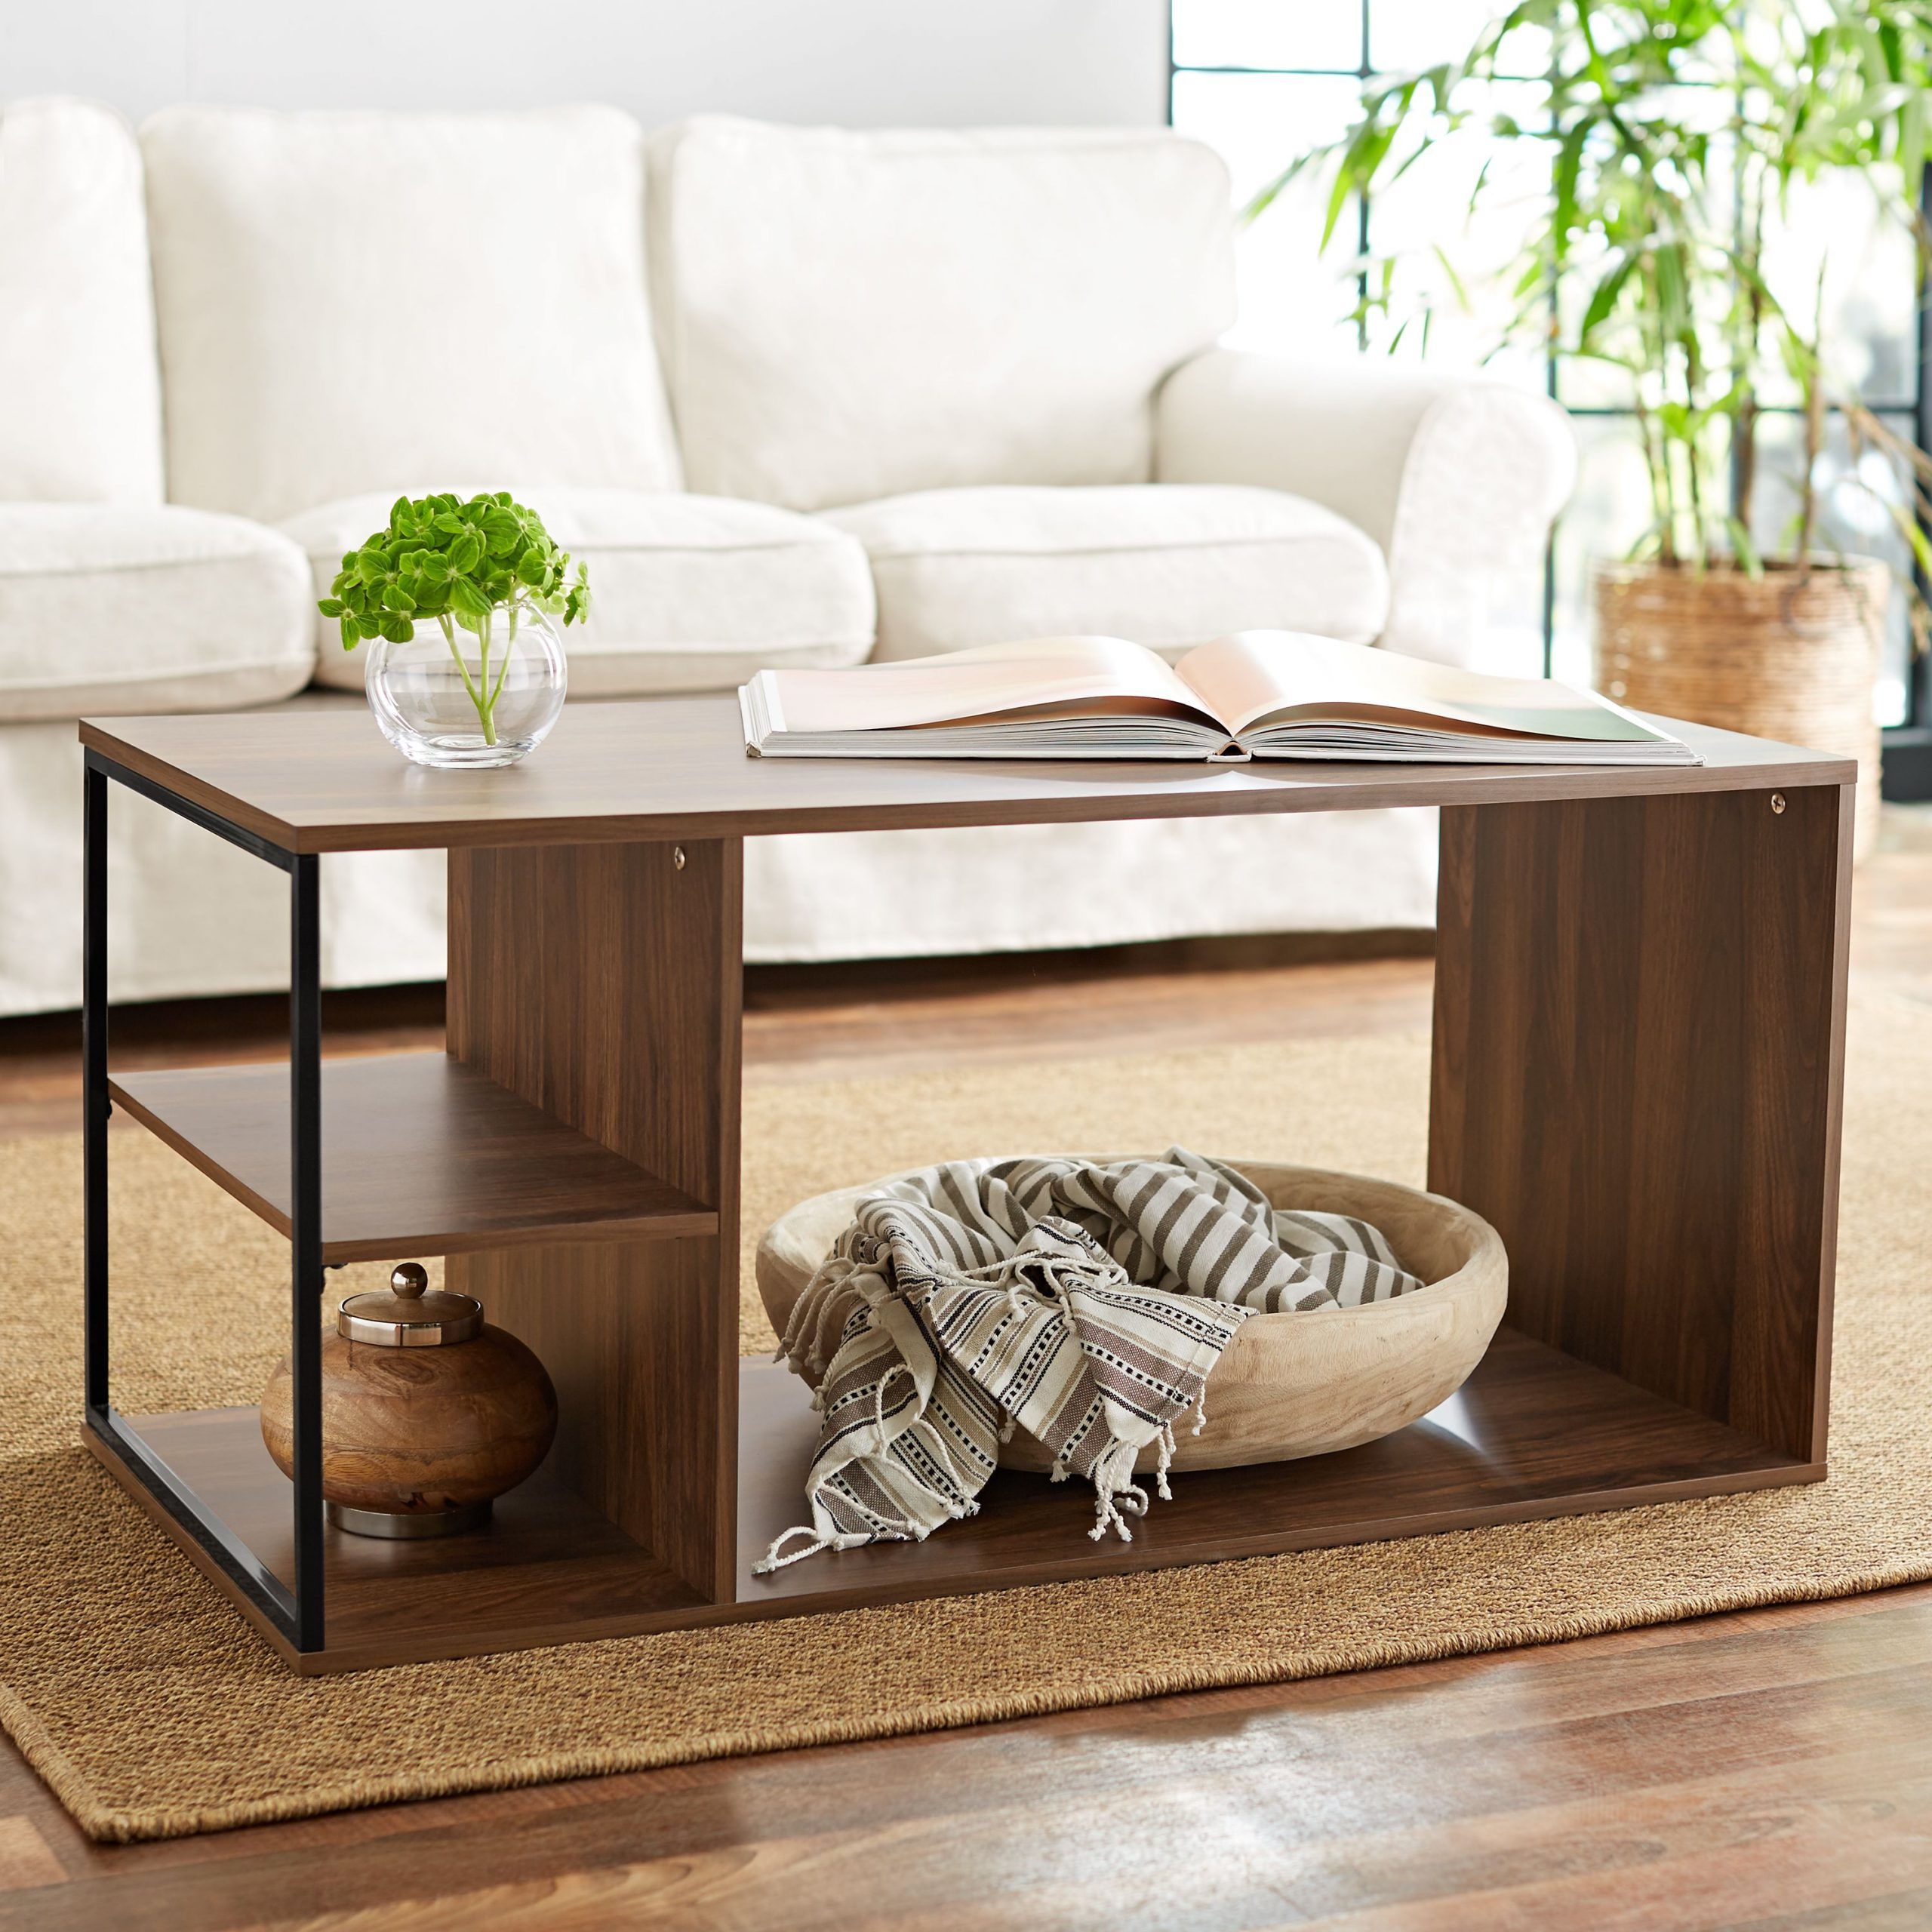 Mainstays Kalla Wood And Metal Coffee Table – Walmart With Regard To Espresso Wood Storage Coffee Tables (View 2 of 15)